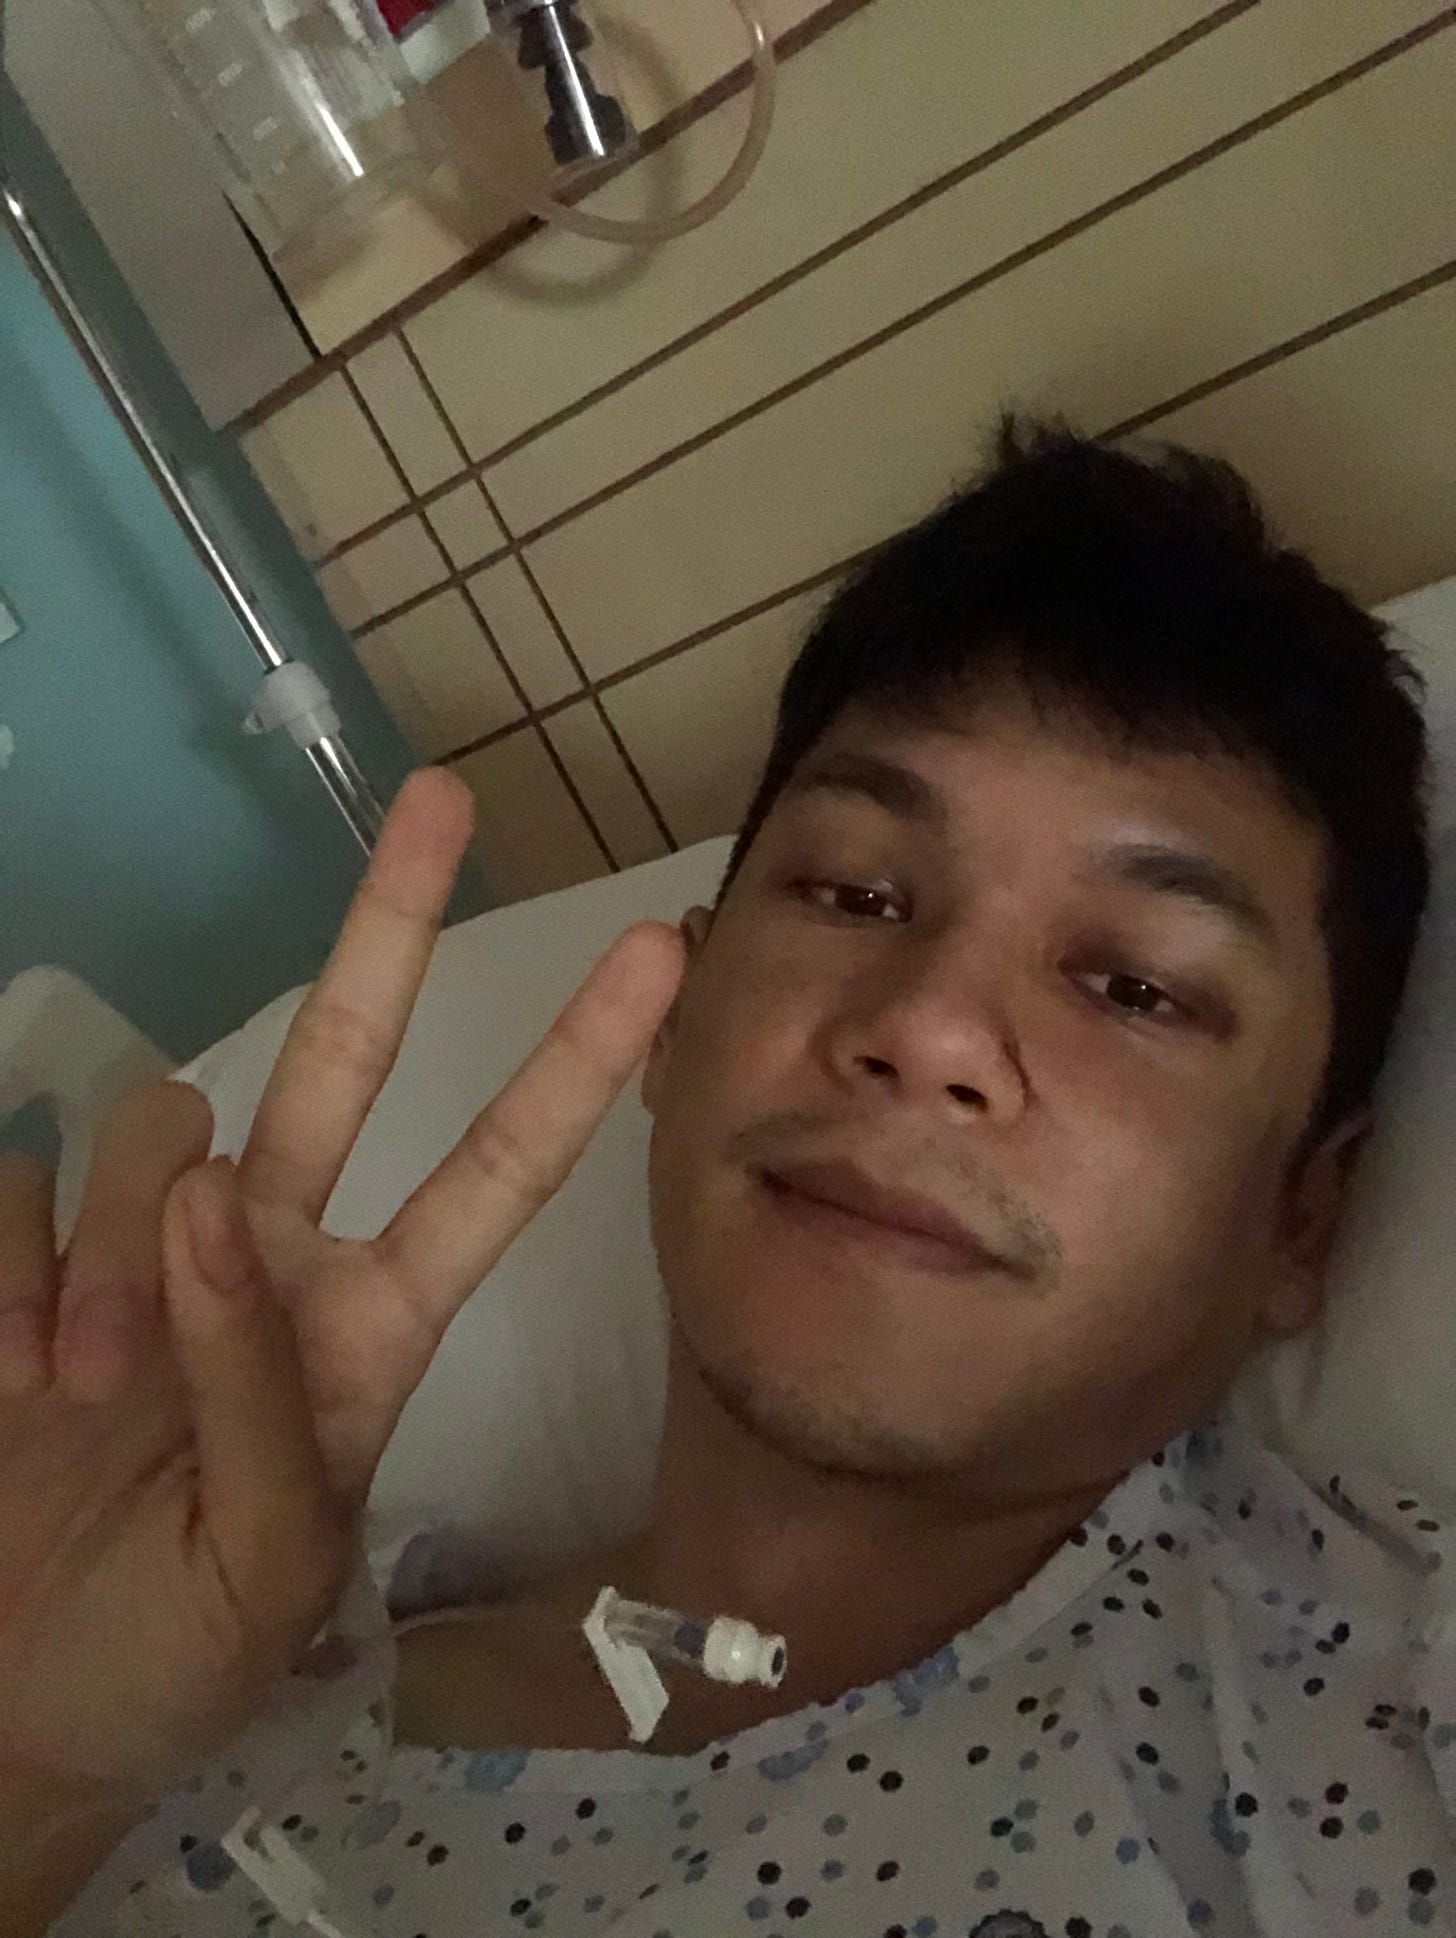 Selfie by author in hospital bed.